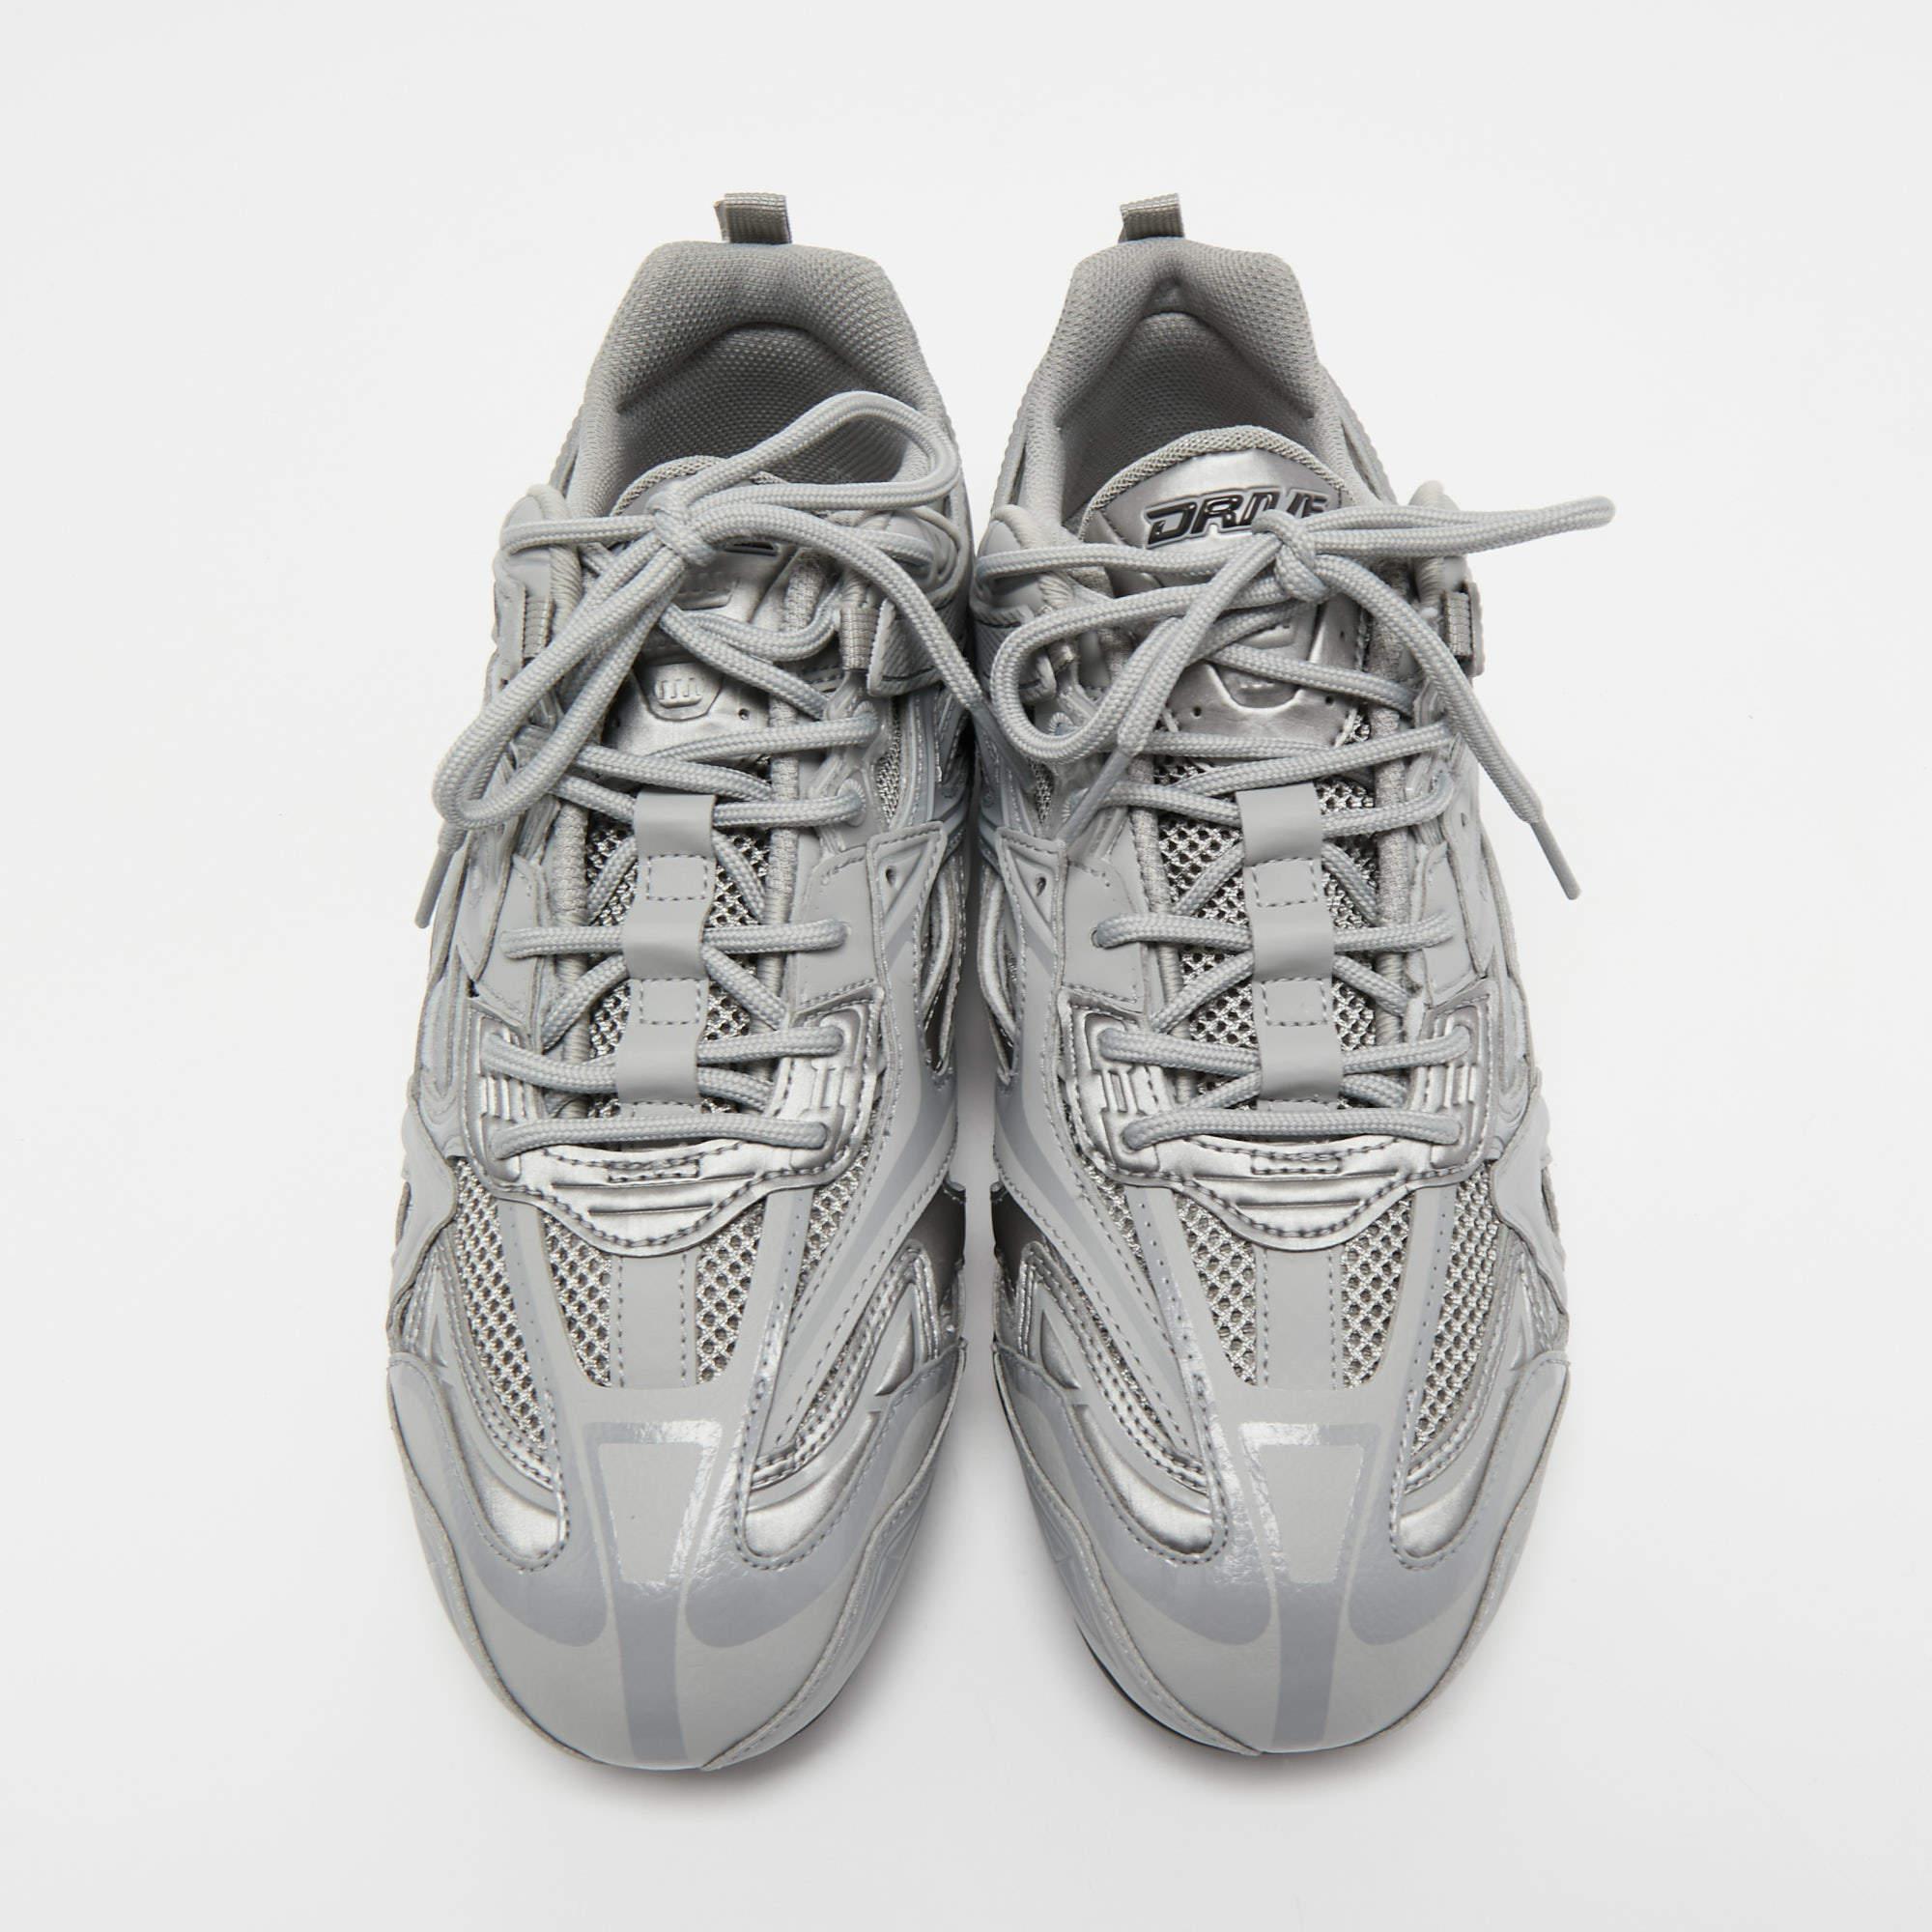 These Track sneakers from Balenciaga offer the correct amount of style and comfort. They have been crafted from mesh, rubber, and synthetic leather, they are designed in a low-top silhouette with contrasting panels, lace-up vamps, and the brand